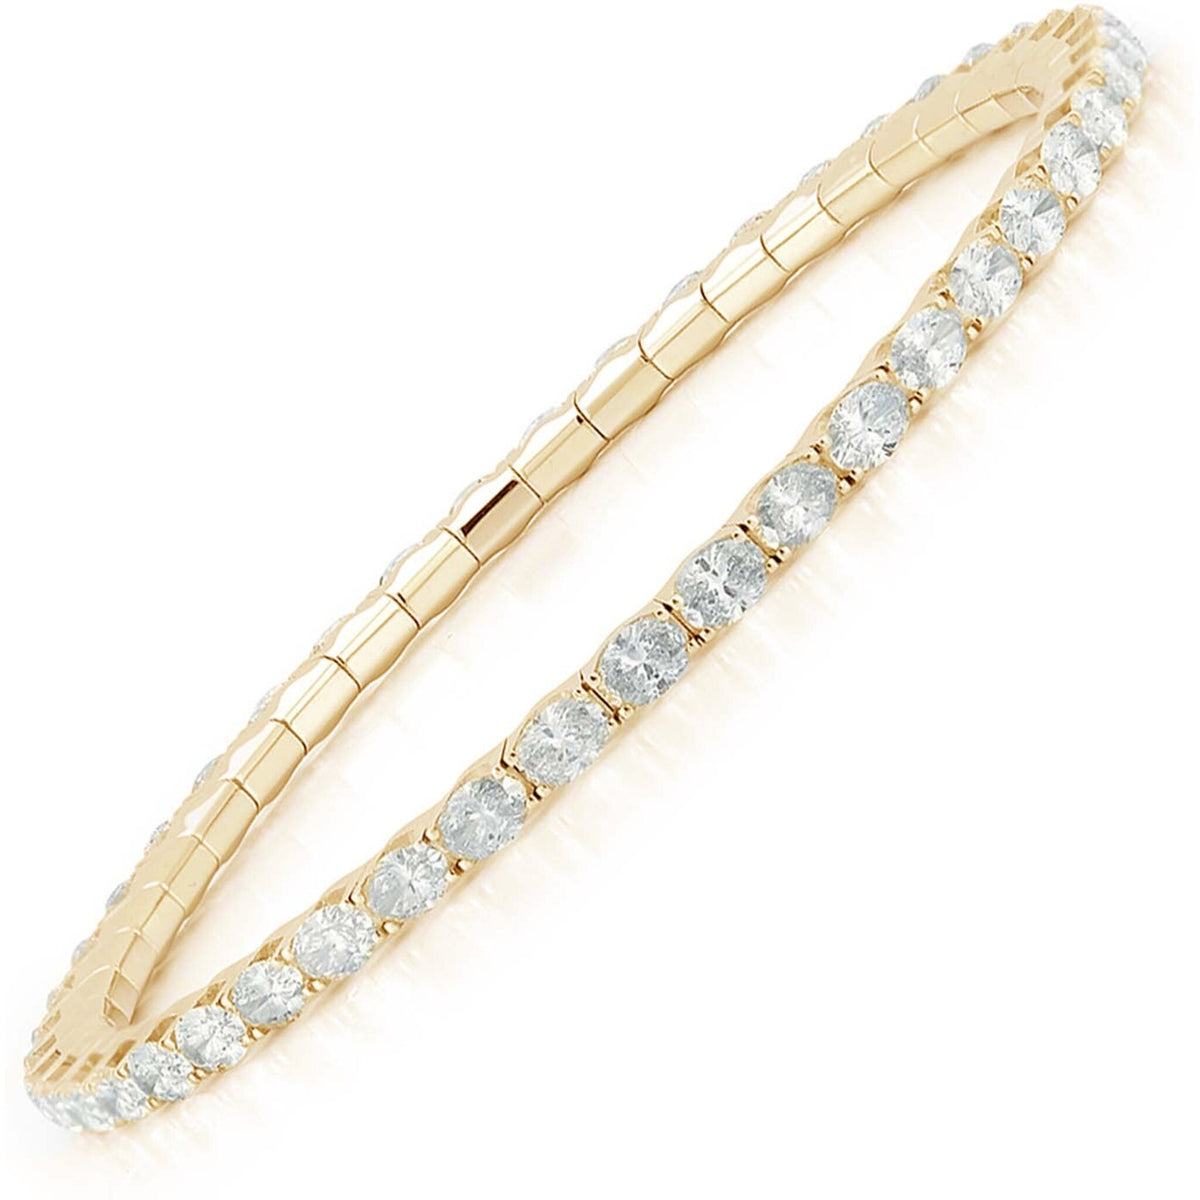 Extensible - 6.46 Carat Oval Cut Diamond Stretch Tennis Bracelet - Available in 3 Carat Sizes - 18K Yellow Gold